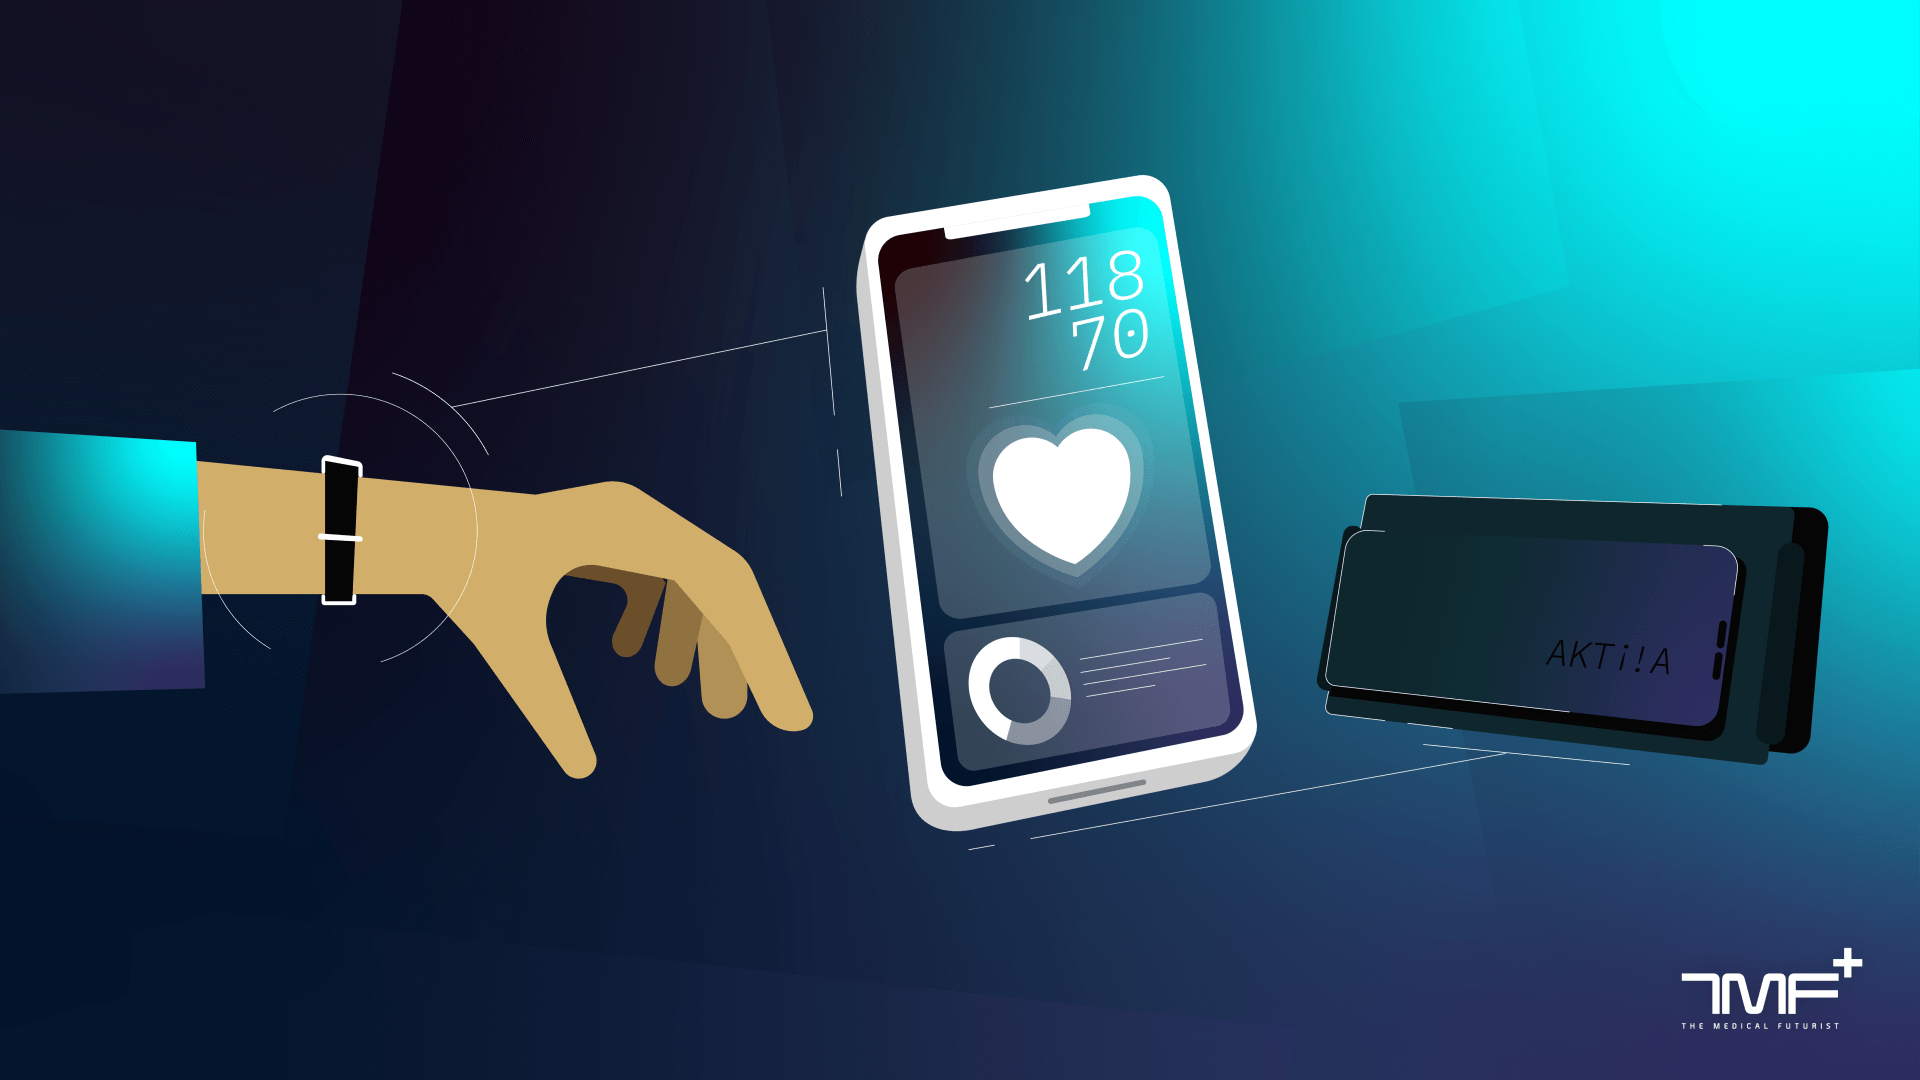 Wearable continuous blood pressure monitoring is here